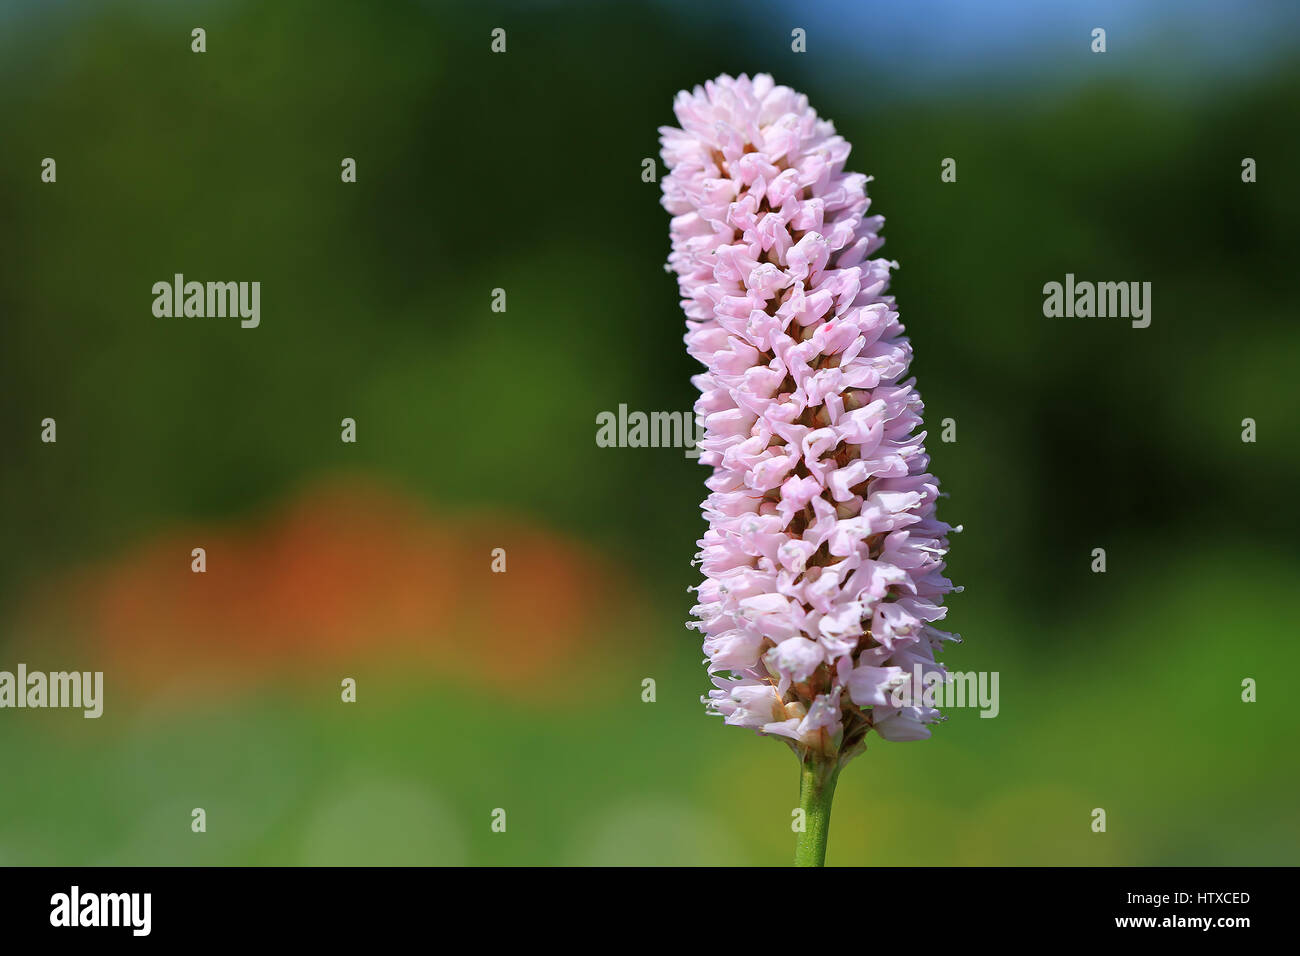 Pink Persicaria bistorta or Polygonum bistorta flower close up in garden at spring, selective focus, copy space left. Stock Photo